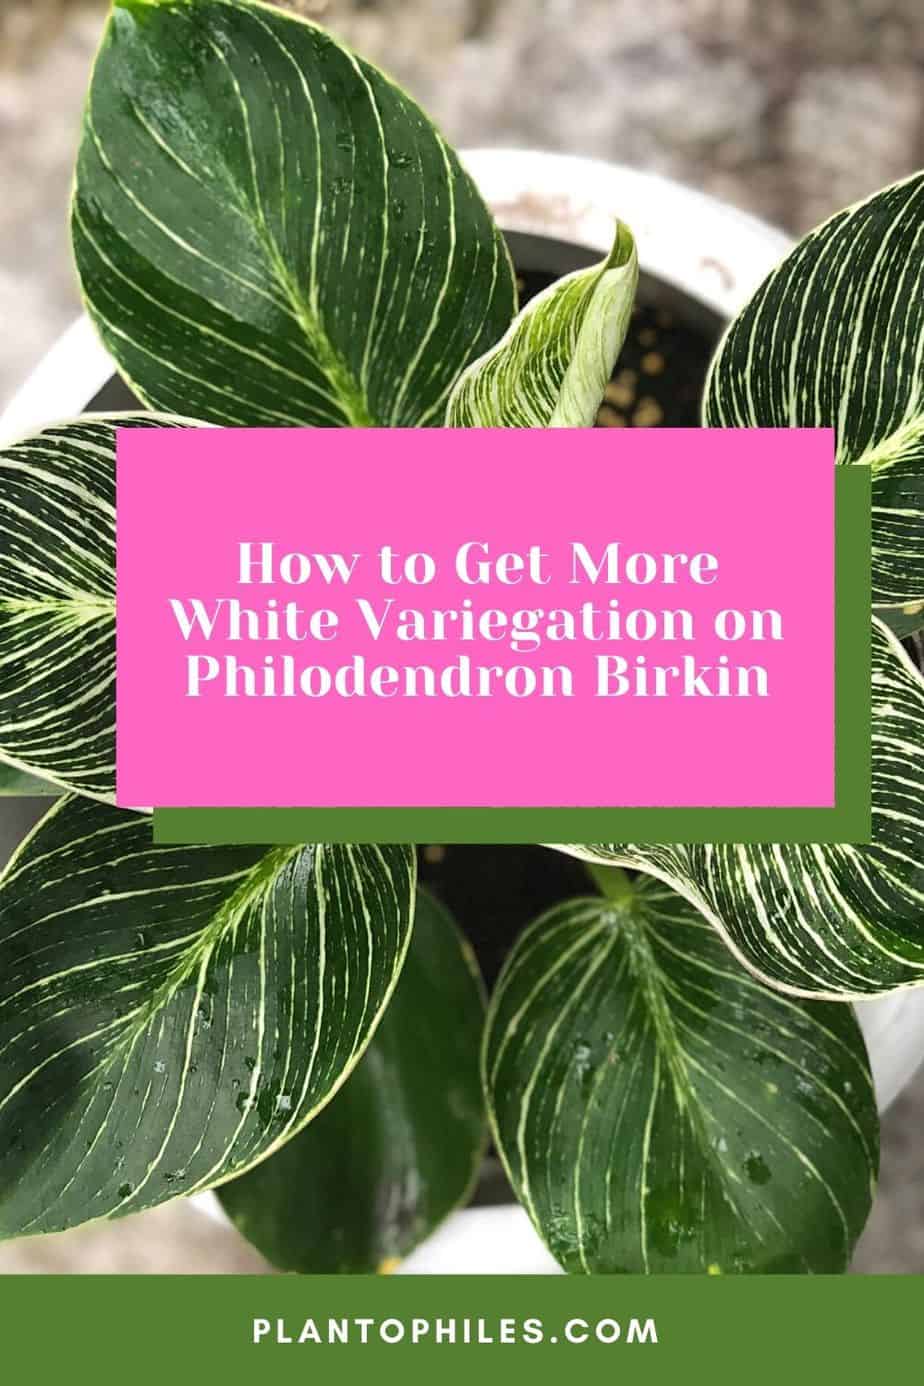 How to Get More White Variegation on Philodendron Birkin